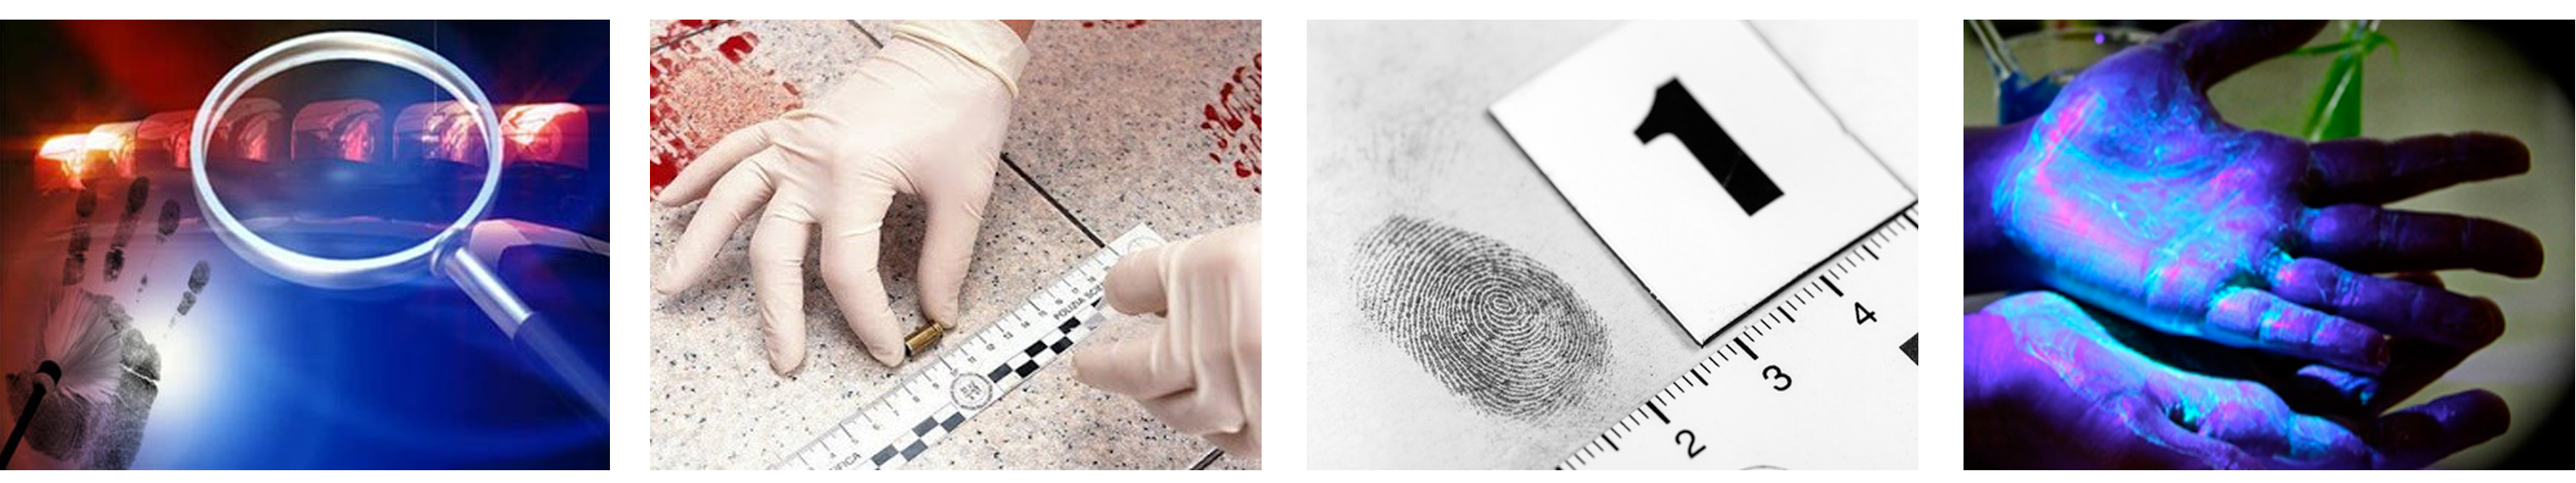 Master Forensic Sciences